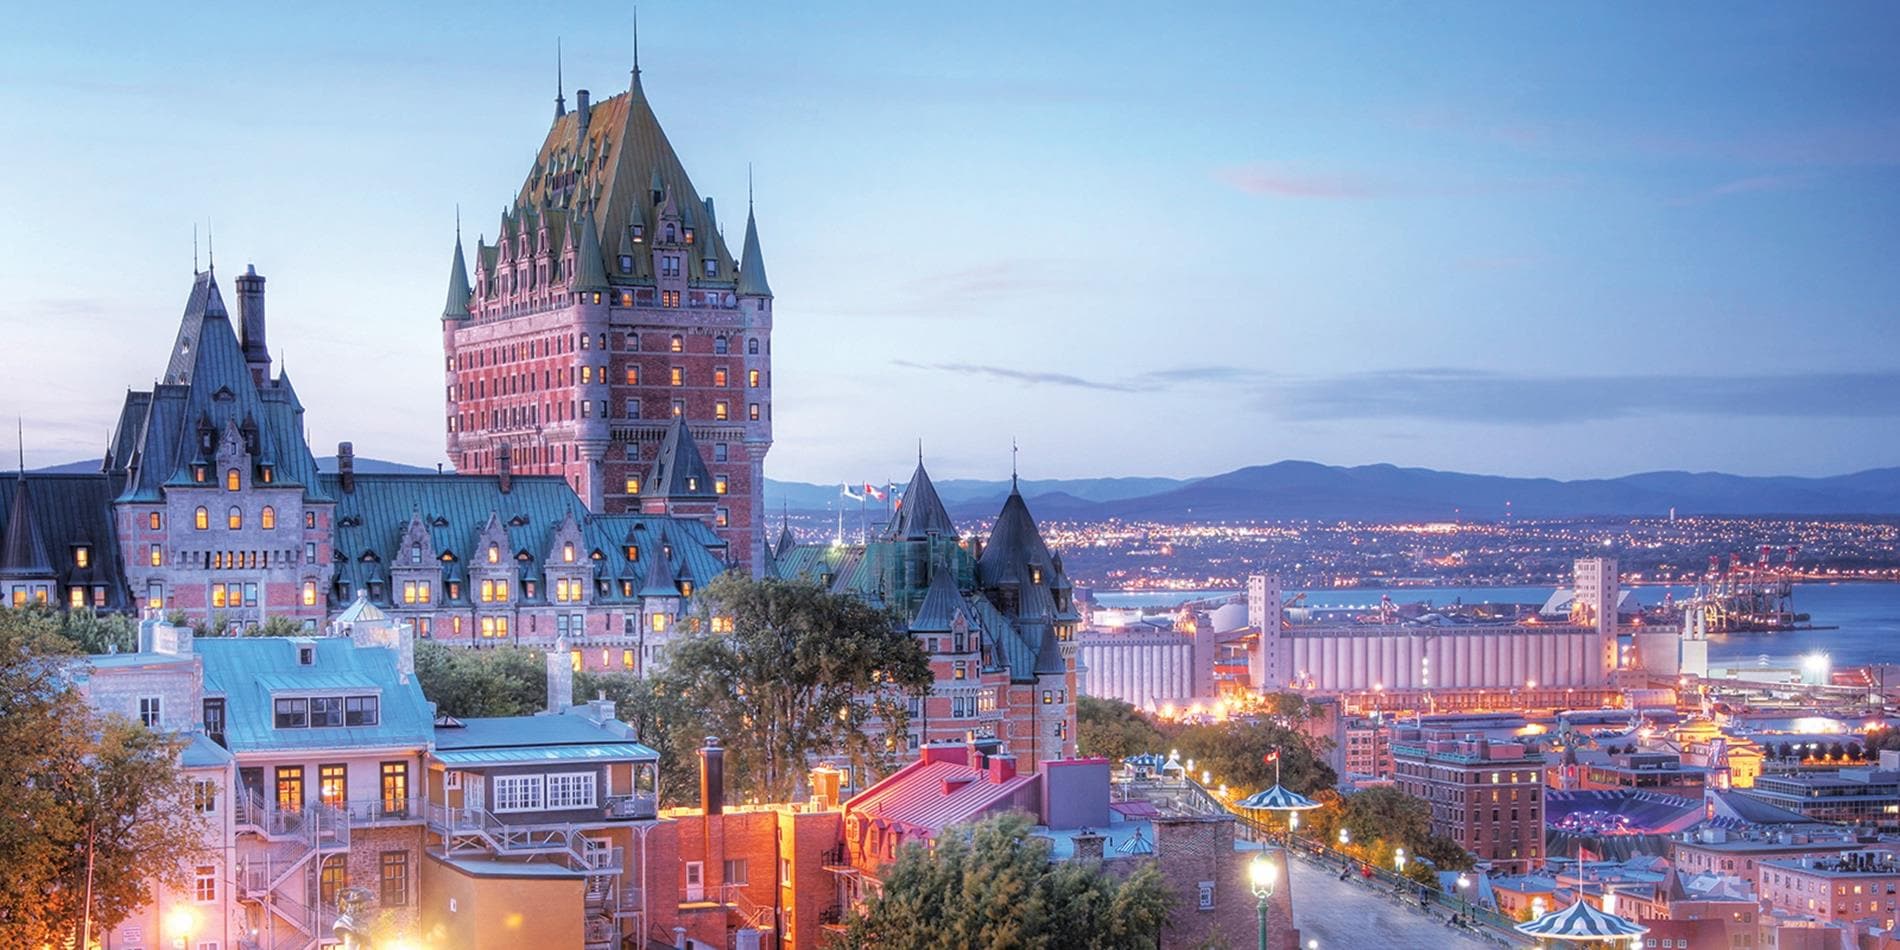 Chateau Frontenac and Quebec City at night